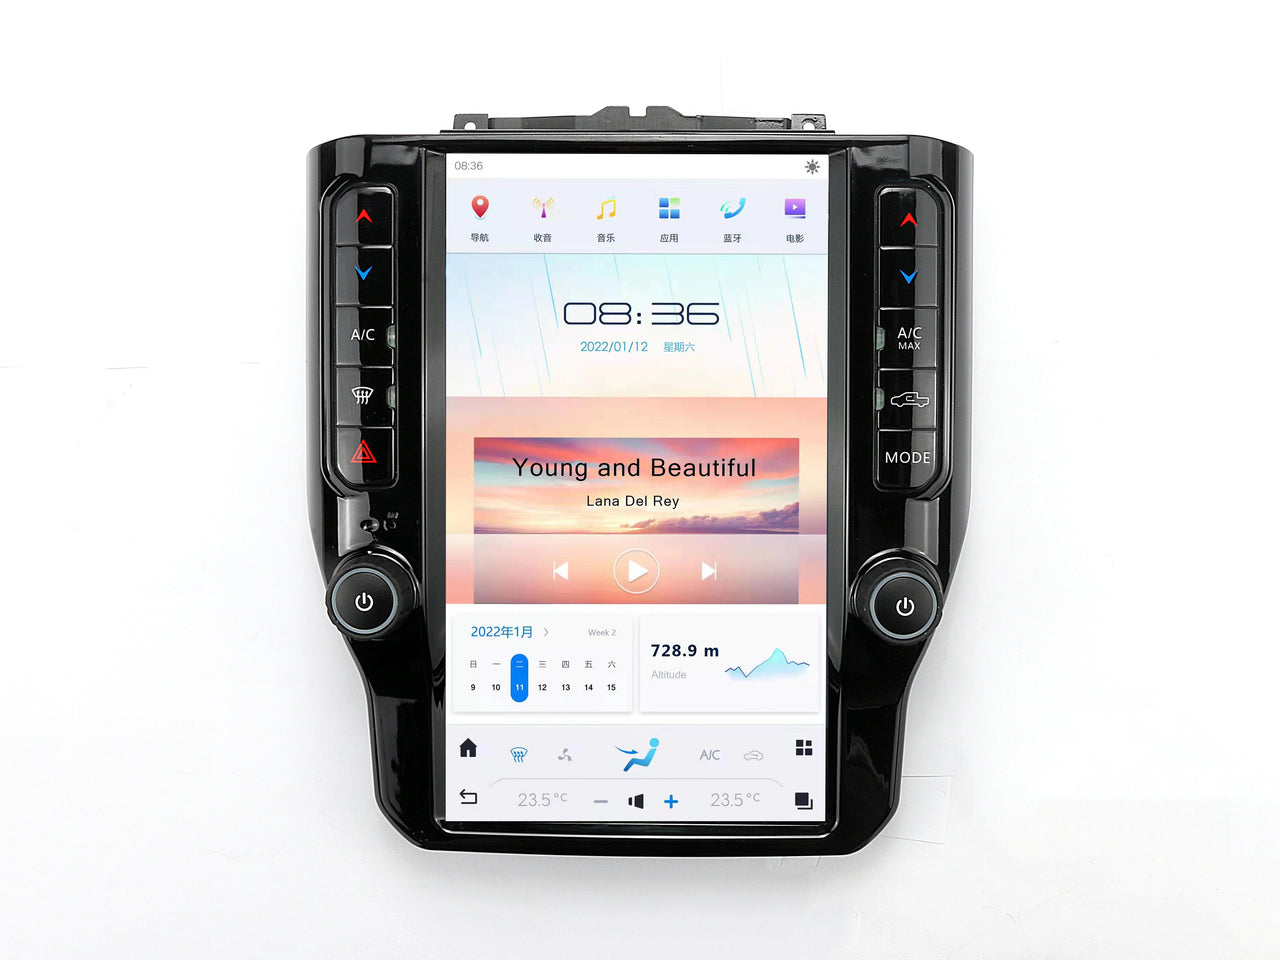 Dodge RAM 1500/2500 (2020-2021) with the Qualcomm Android 11 Screen Radio upgrade